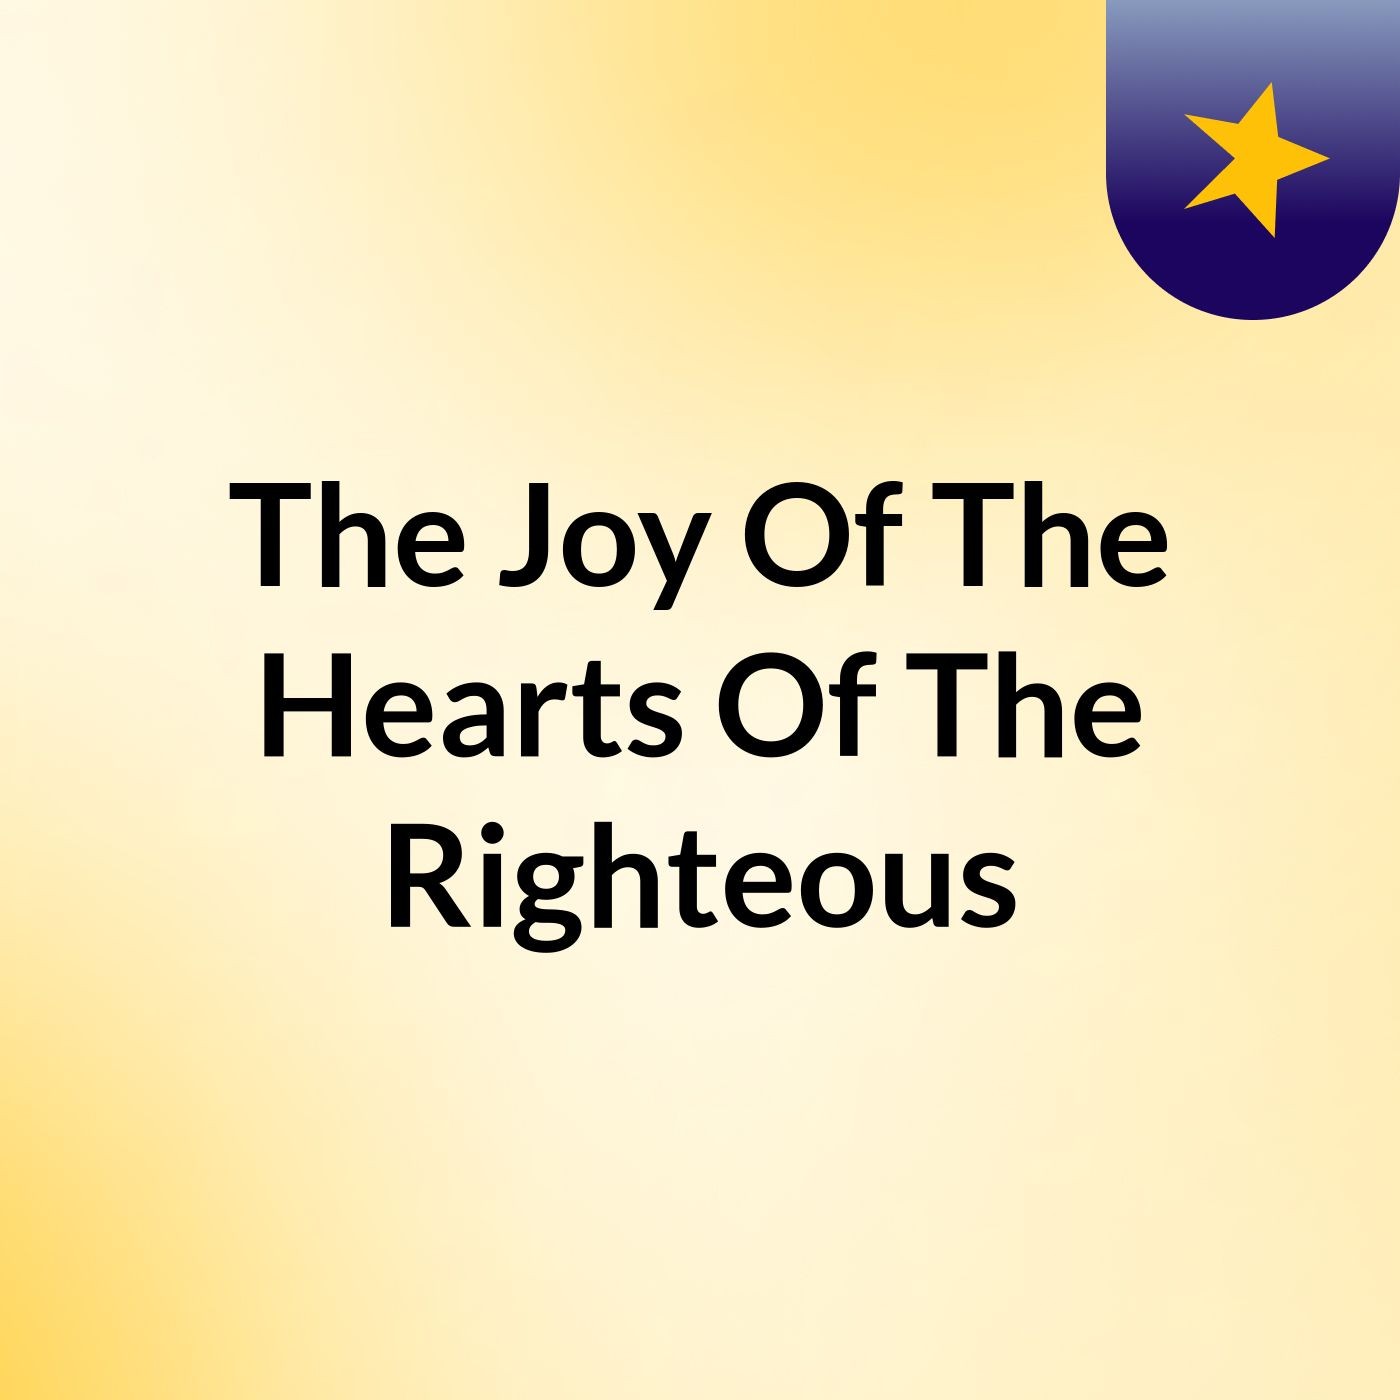 The Joy Of The Hearts Of The Righteous